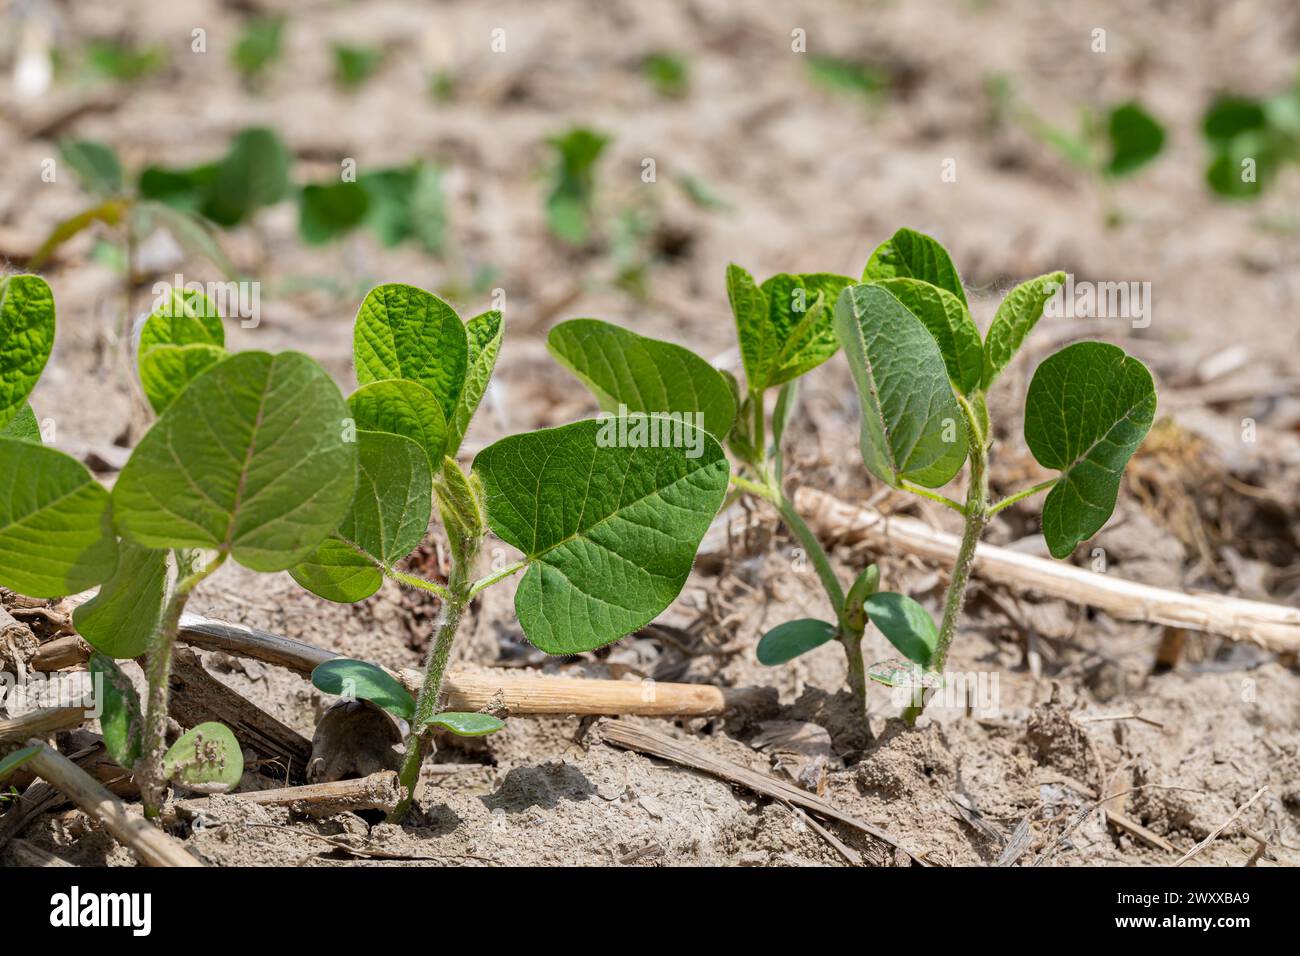 Soybeans growing in field after planting. Agriculture, soybean farming and growth stages concept. Stock Photo